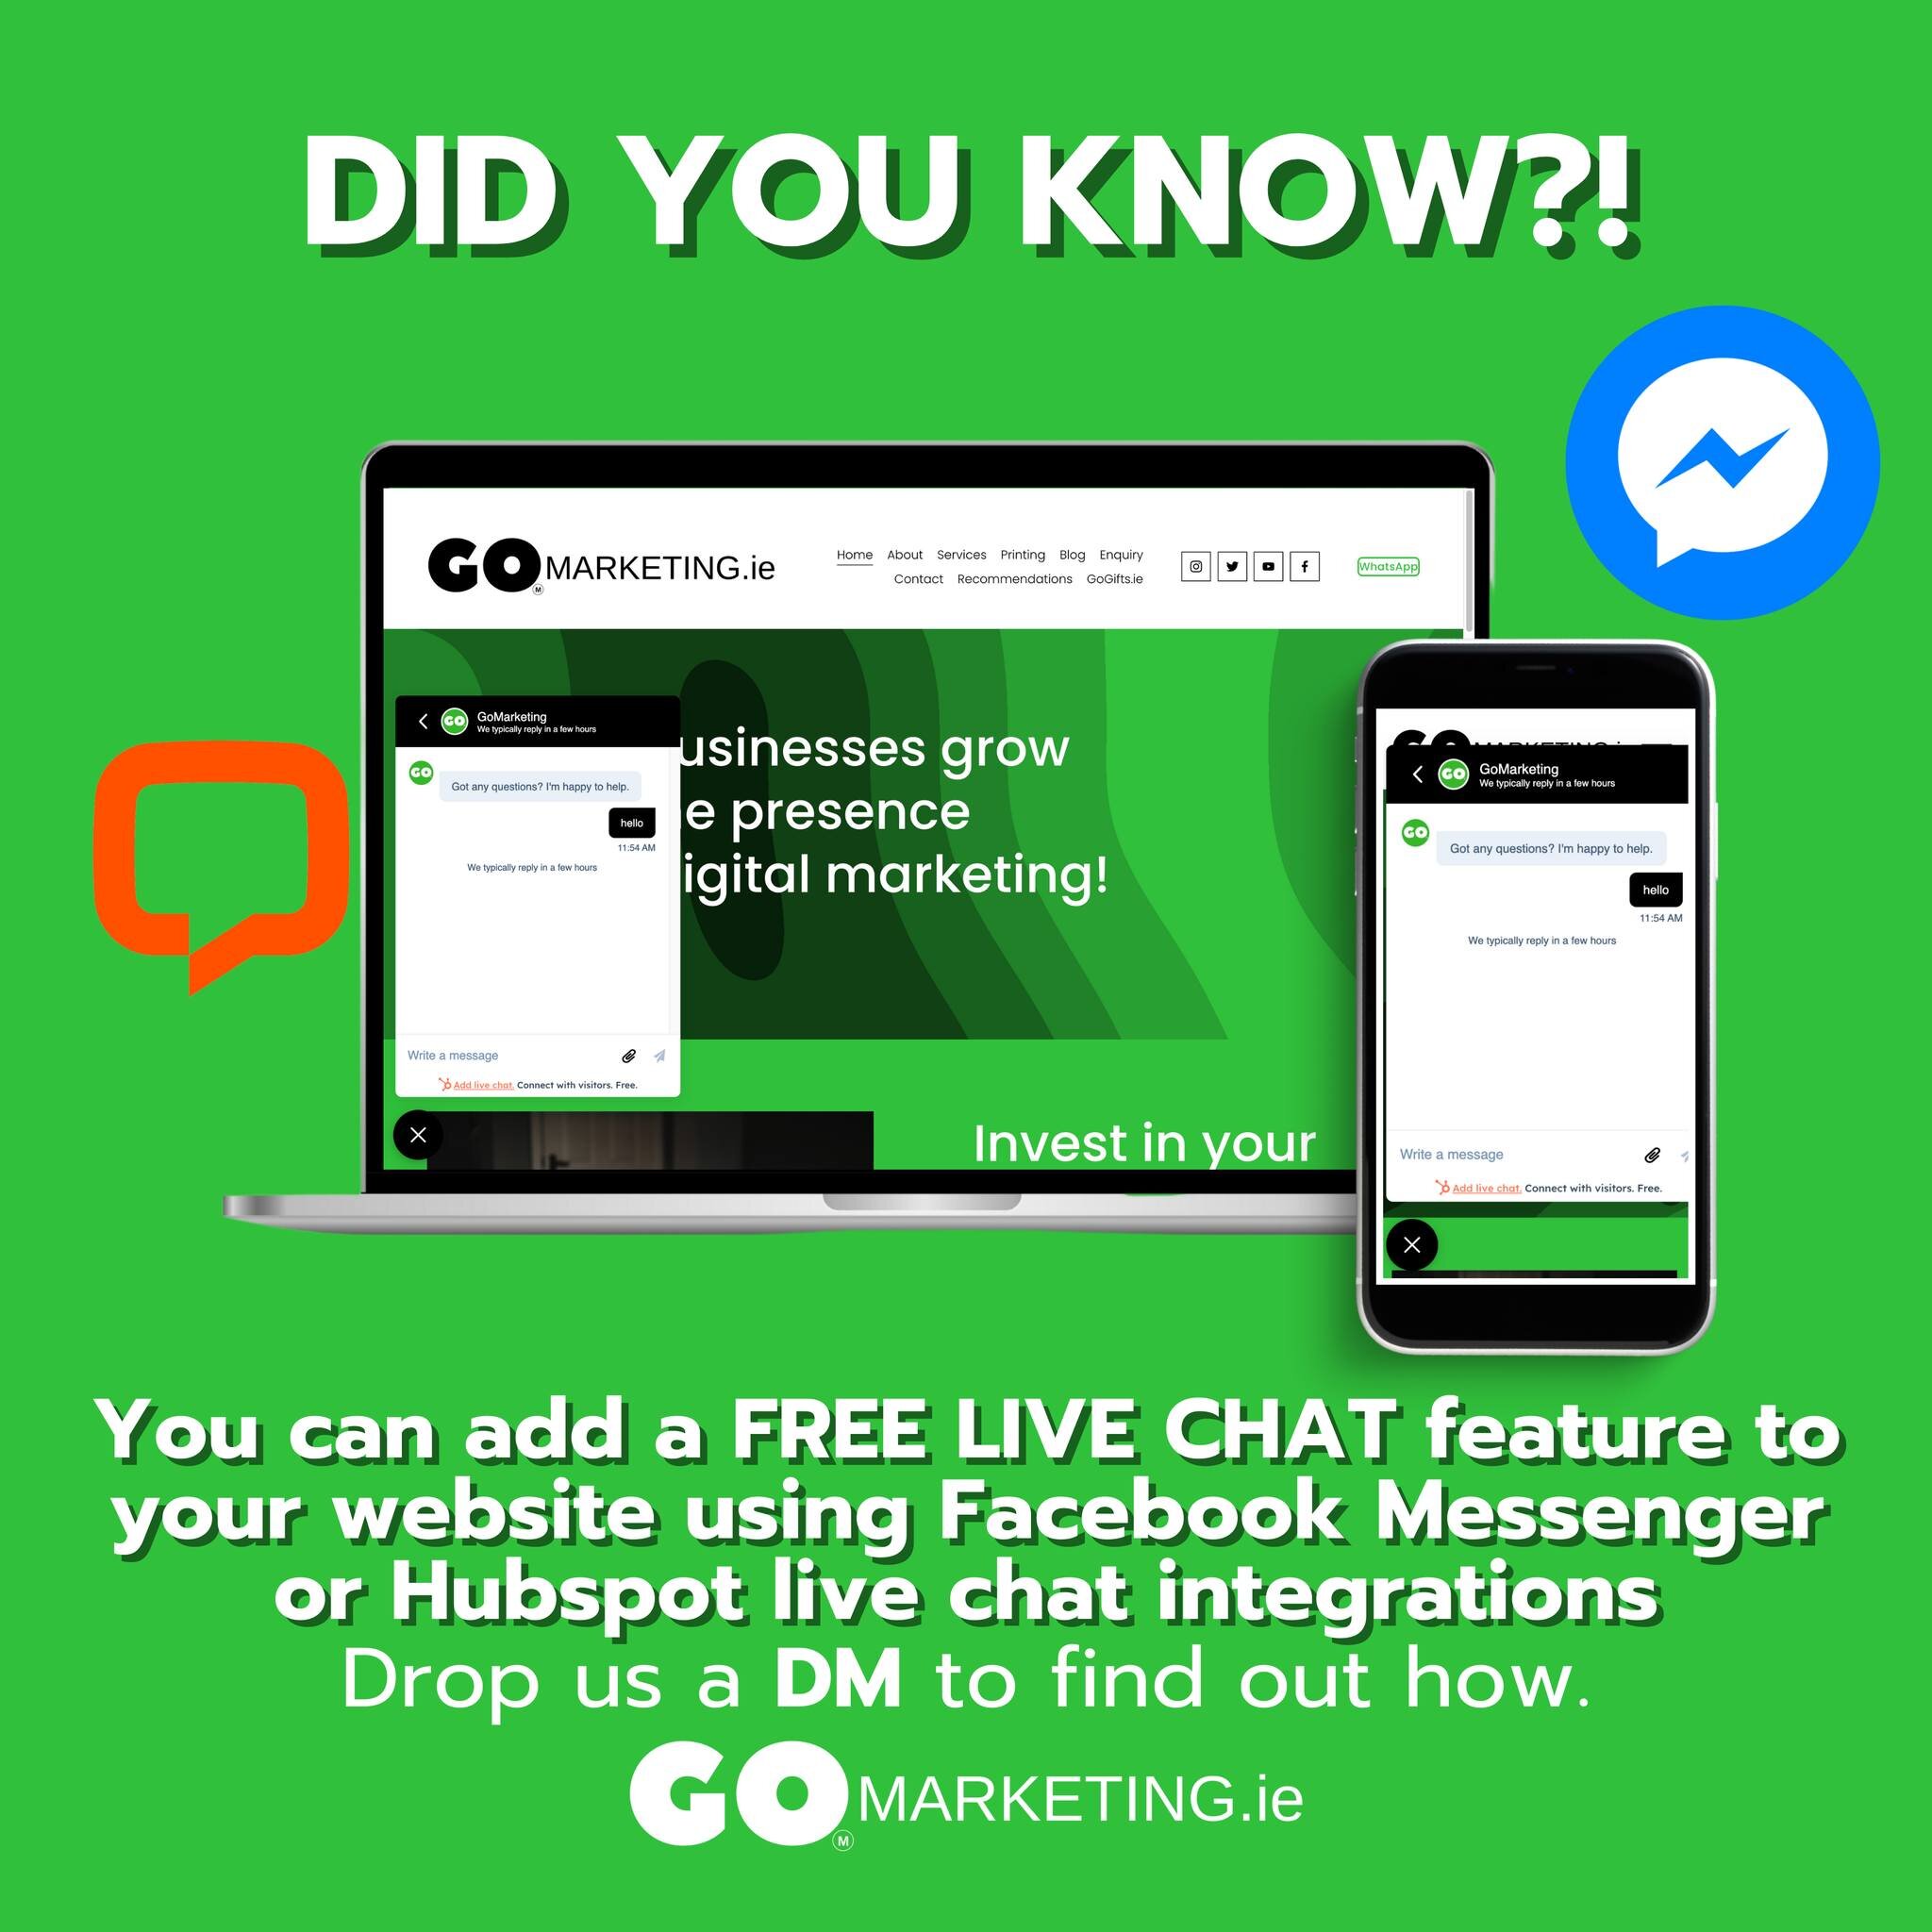 ❔❔DID YOU KNOW❔❔
You can add a FREE LIVE CHAT feature to your website using Facebook Messenger or Hubspot live chat integrations.

Adding a live chat feature to your website can offer numerous benefits:

1️⃣Improved Customer Service
2️⃣Increased Sale